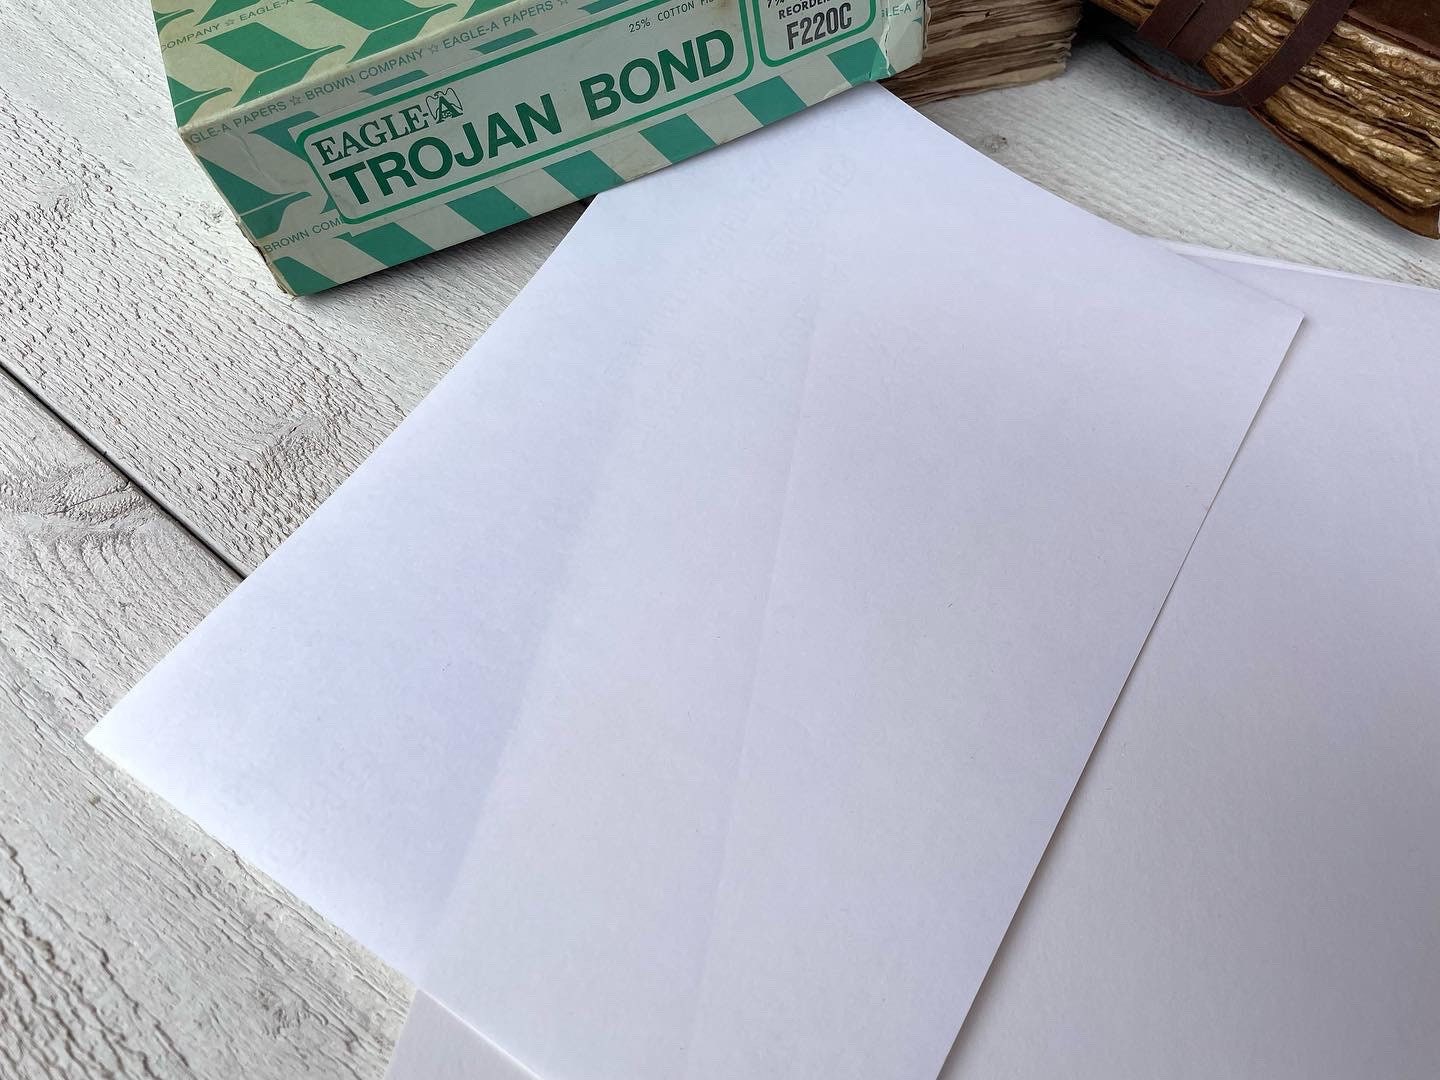 Eagle-A Typing Paper. Type-Erase Bond. 500 Sheets Cockle. 8 1/2 x 13.  Medium